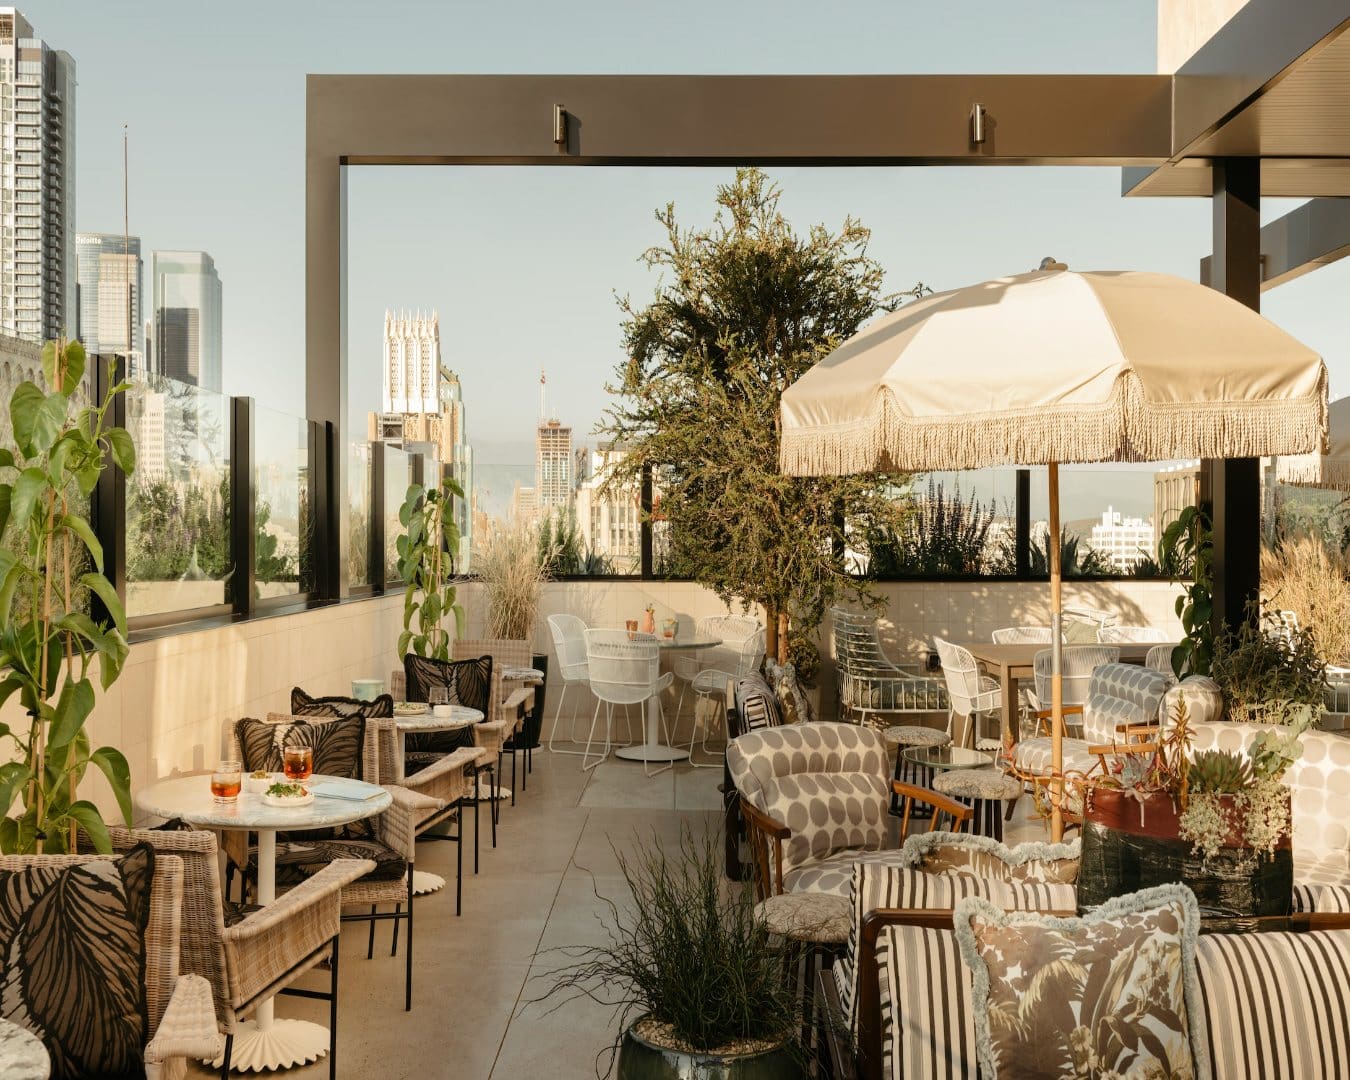 The sun-drenched rooftop Cabra restaurant and bar at The Hoxton